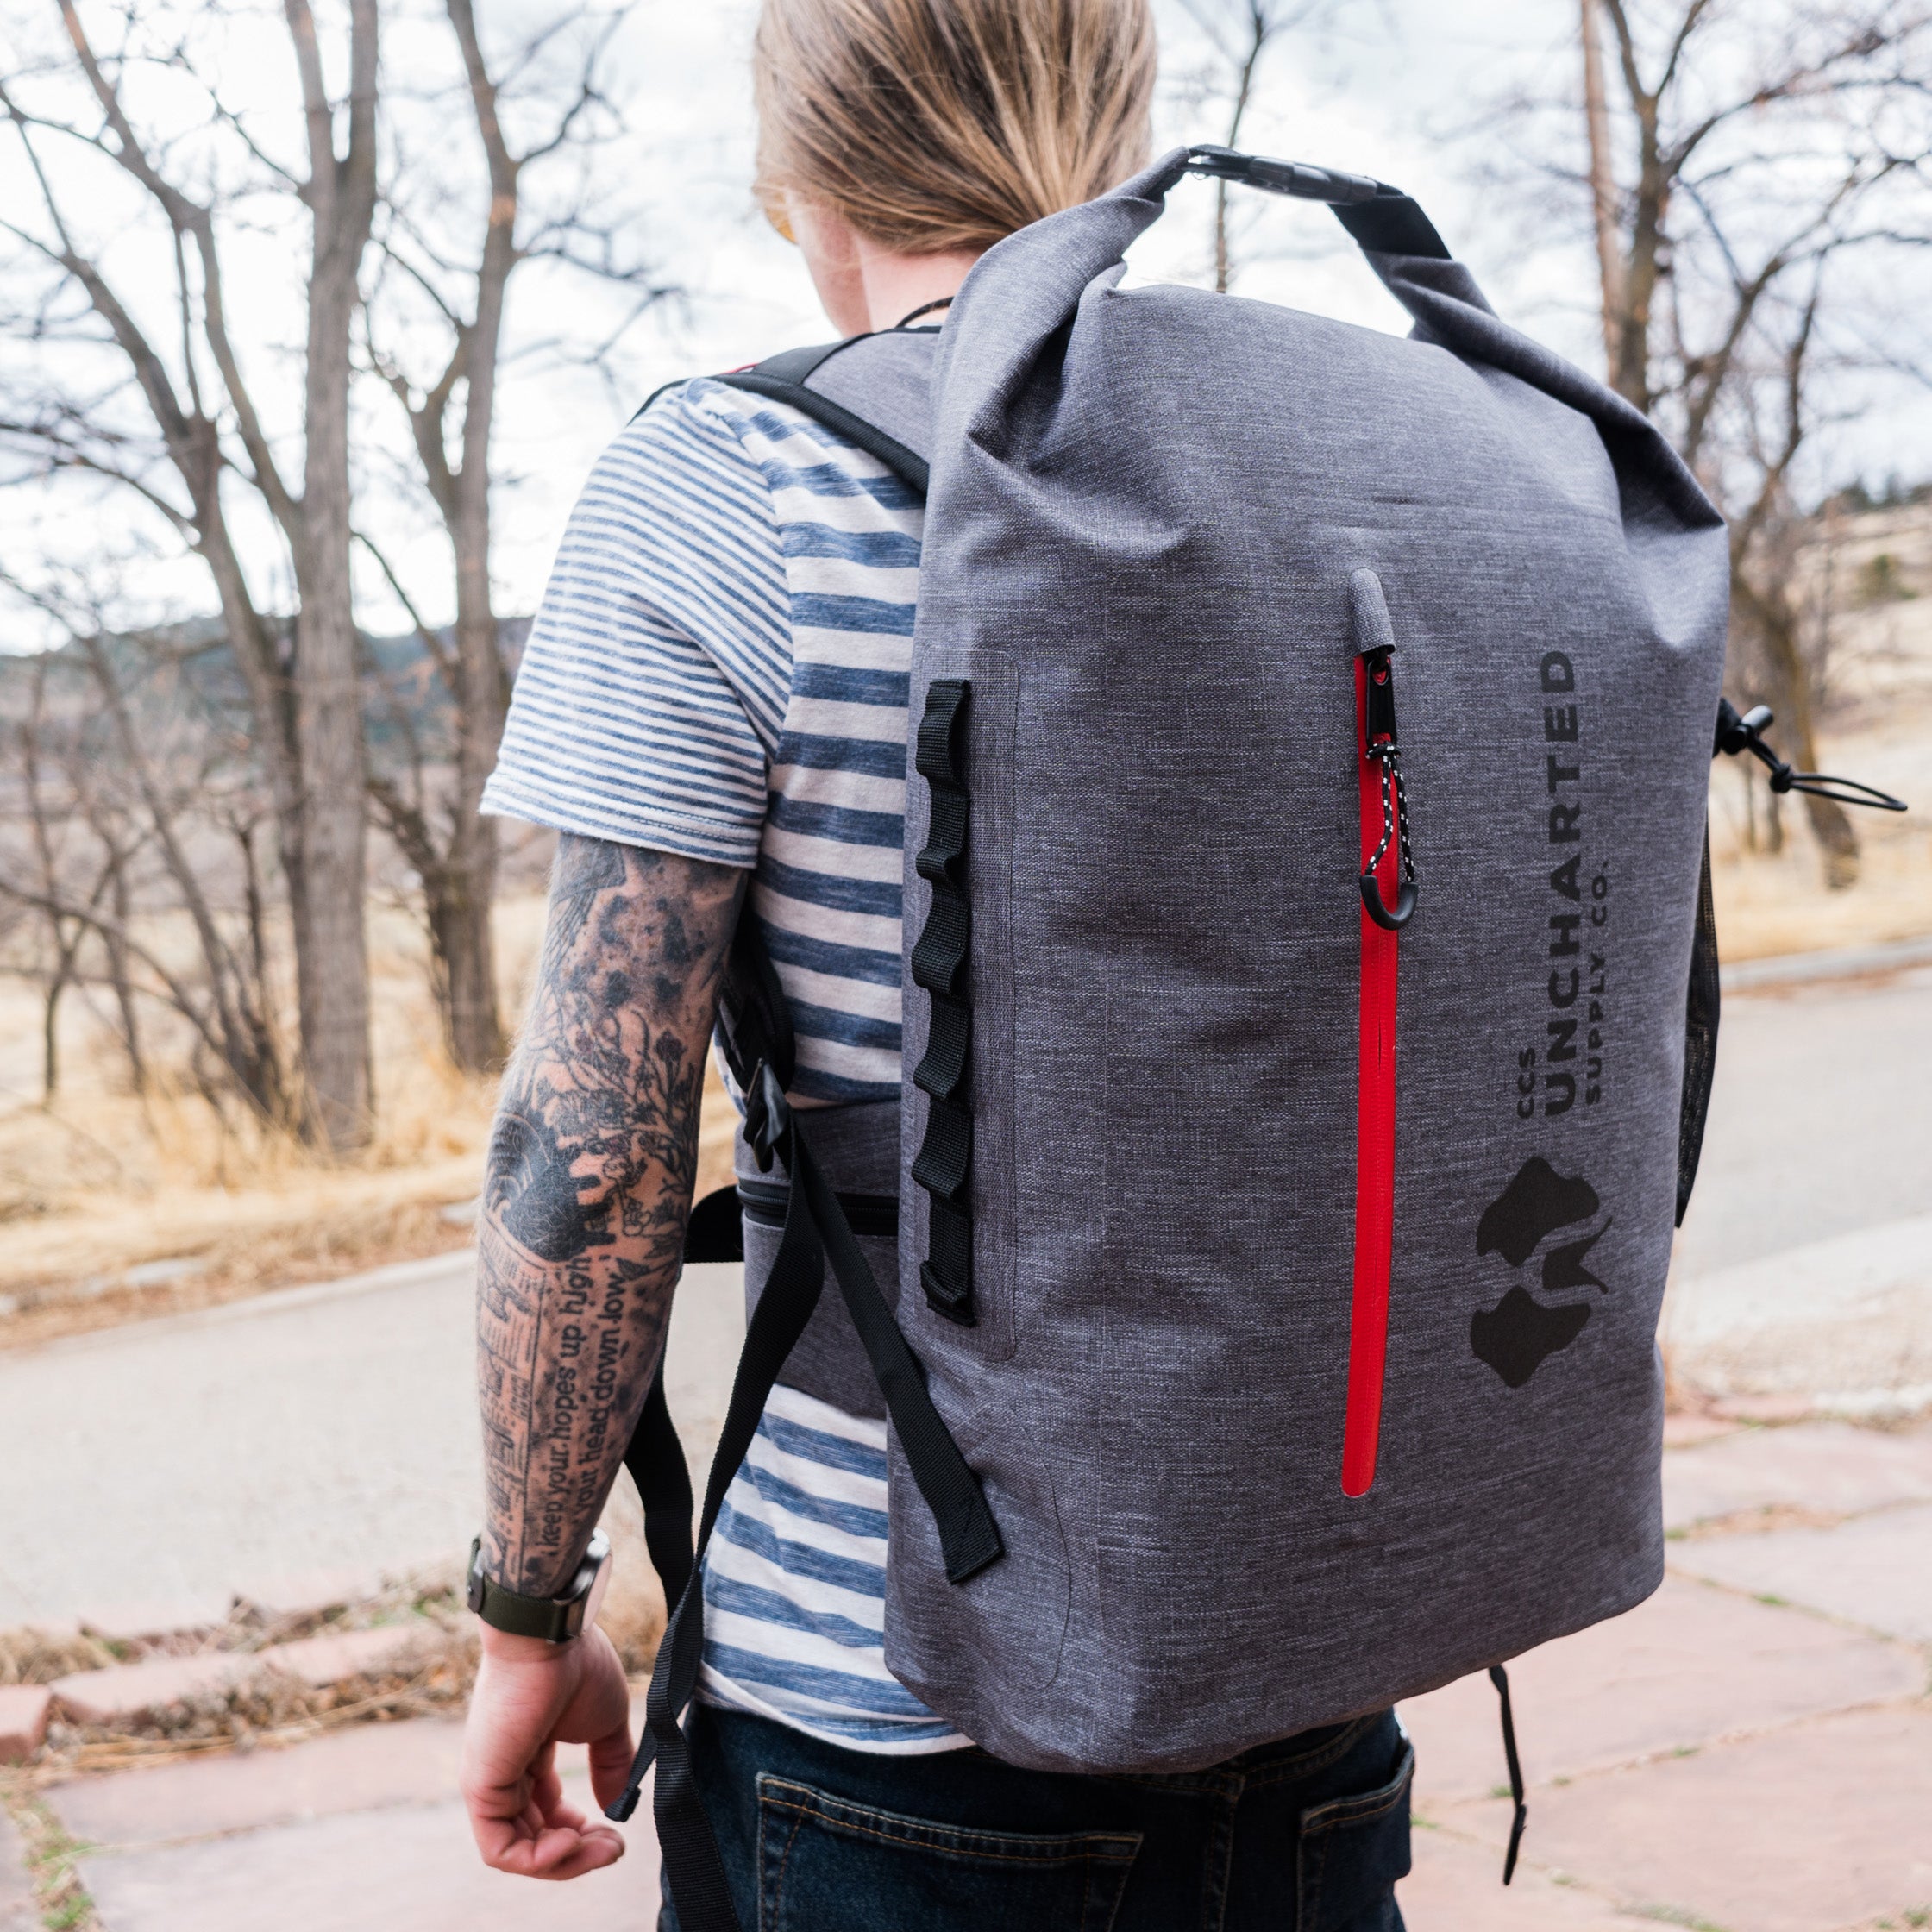 This $350 Backpack Will Keep You Alive